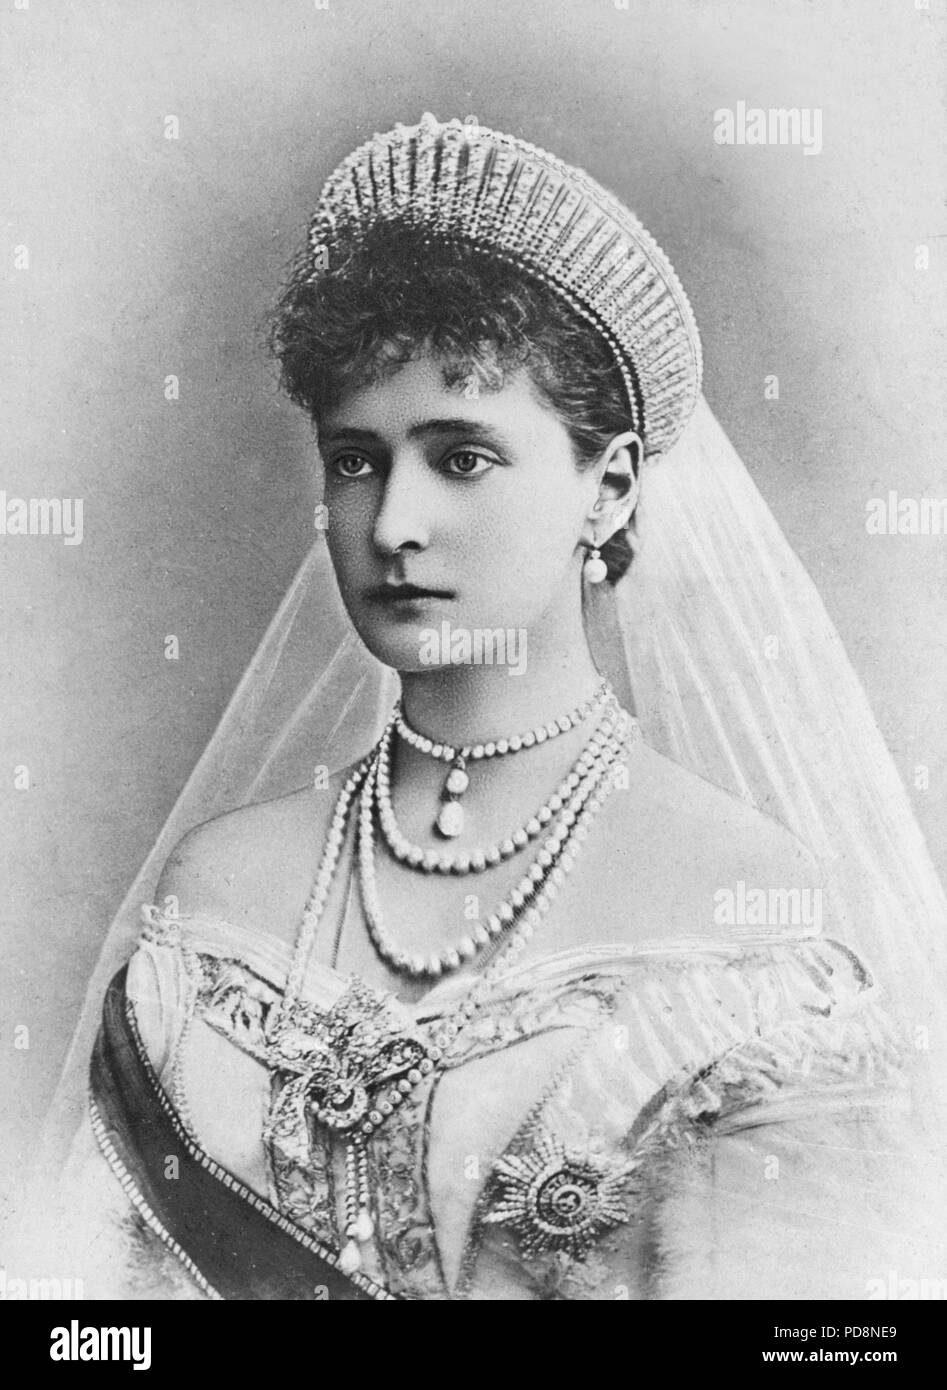 Tsar Nicholas II of Russia. 1868-1918. The last emperor of Russia. Pictured here his wife Empress Alexandra. 1872-1918. Stock Photo